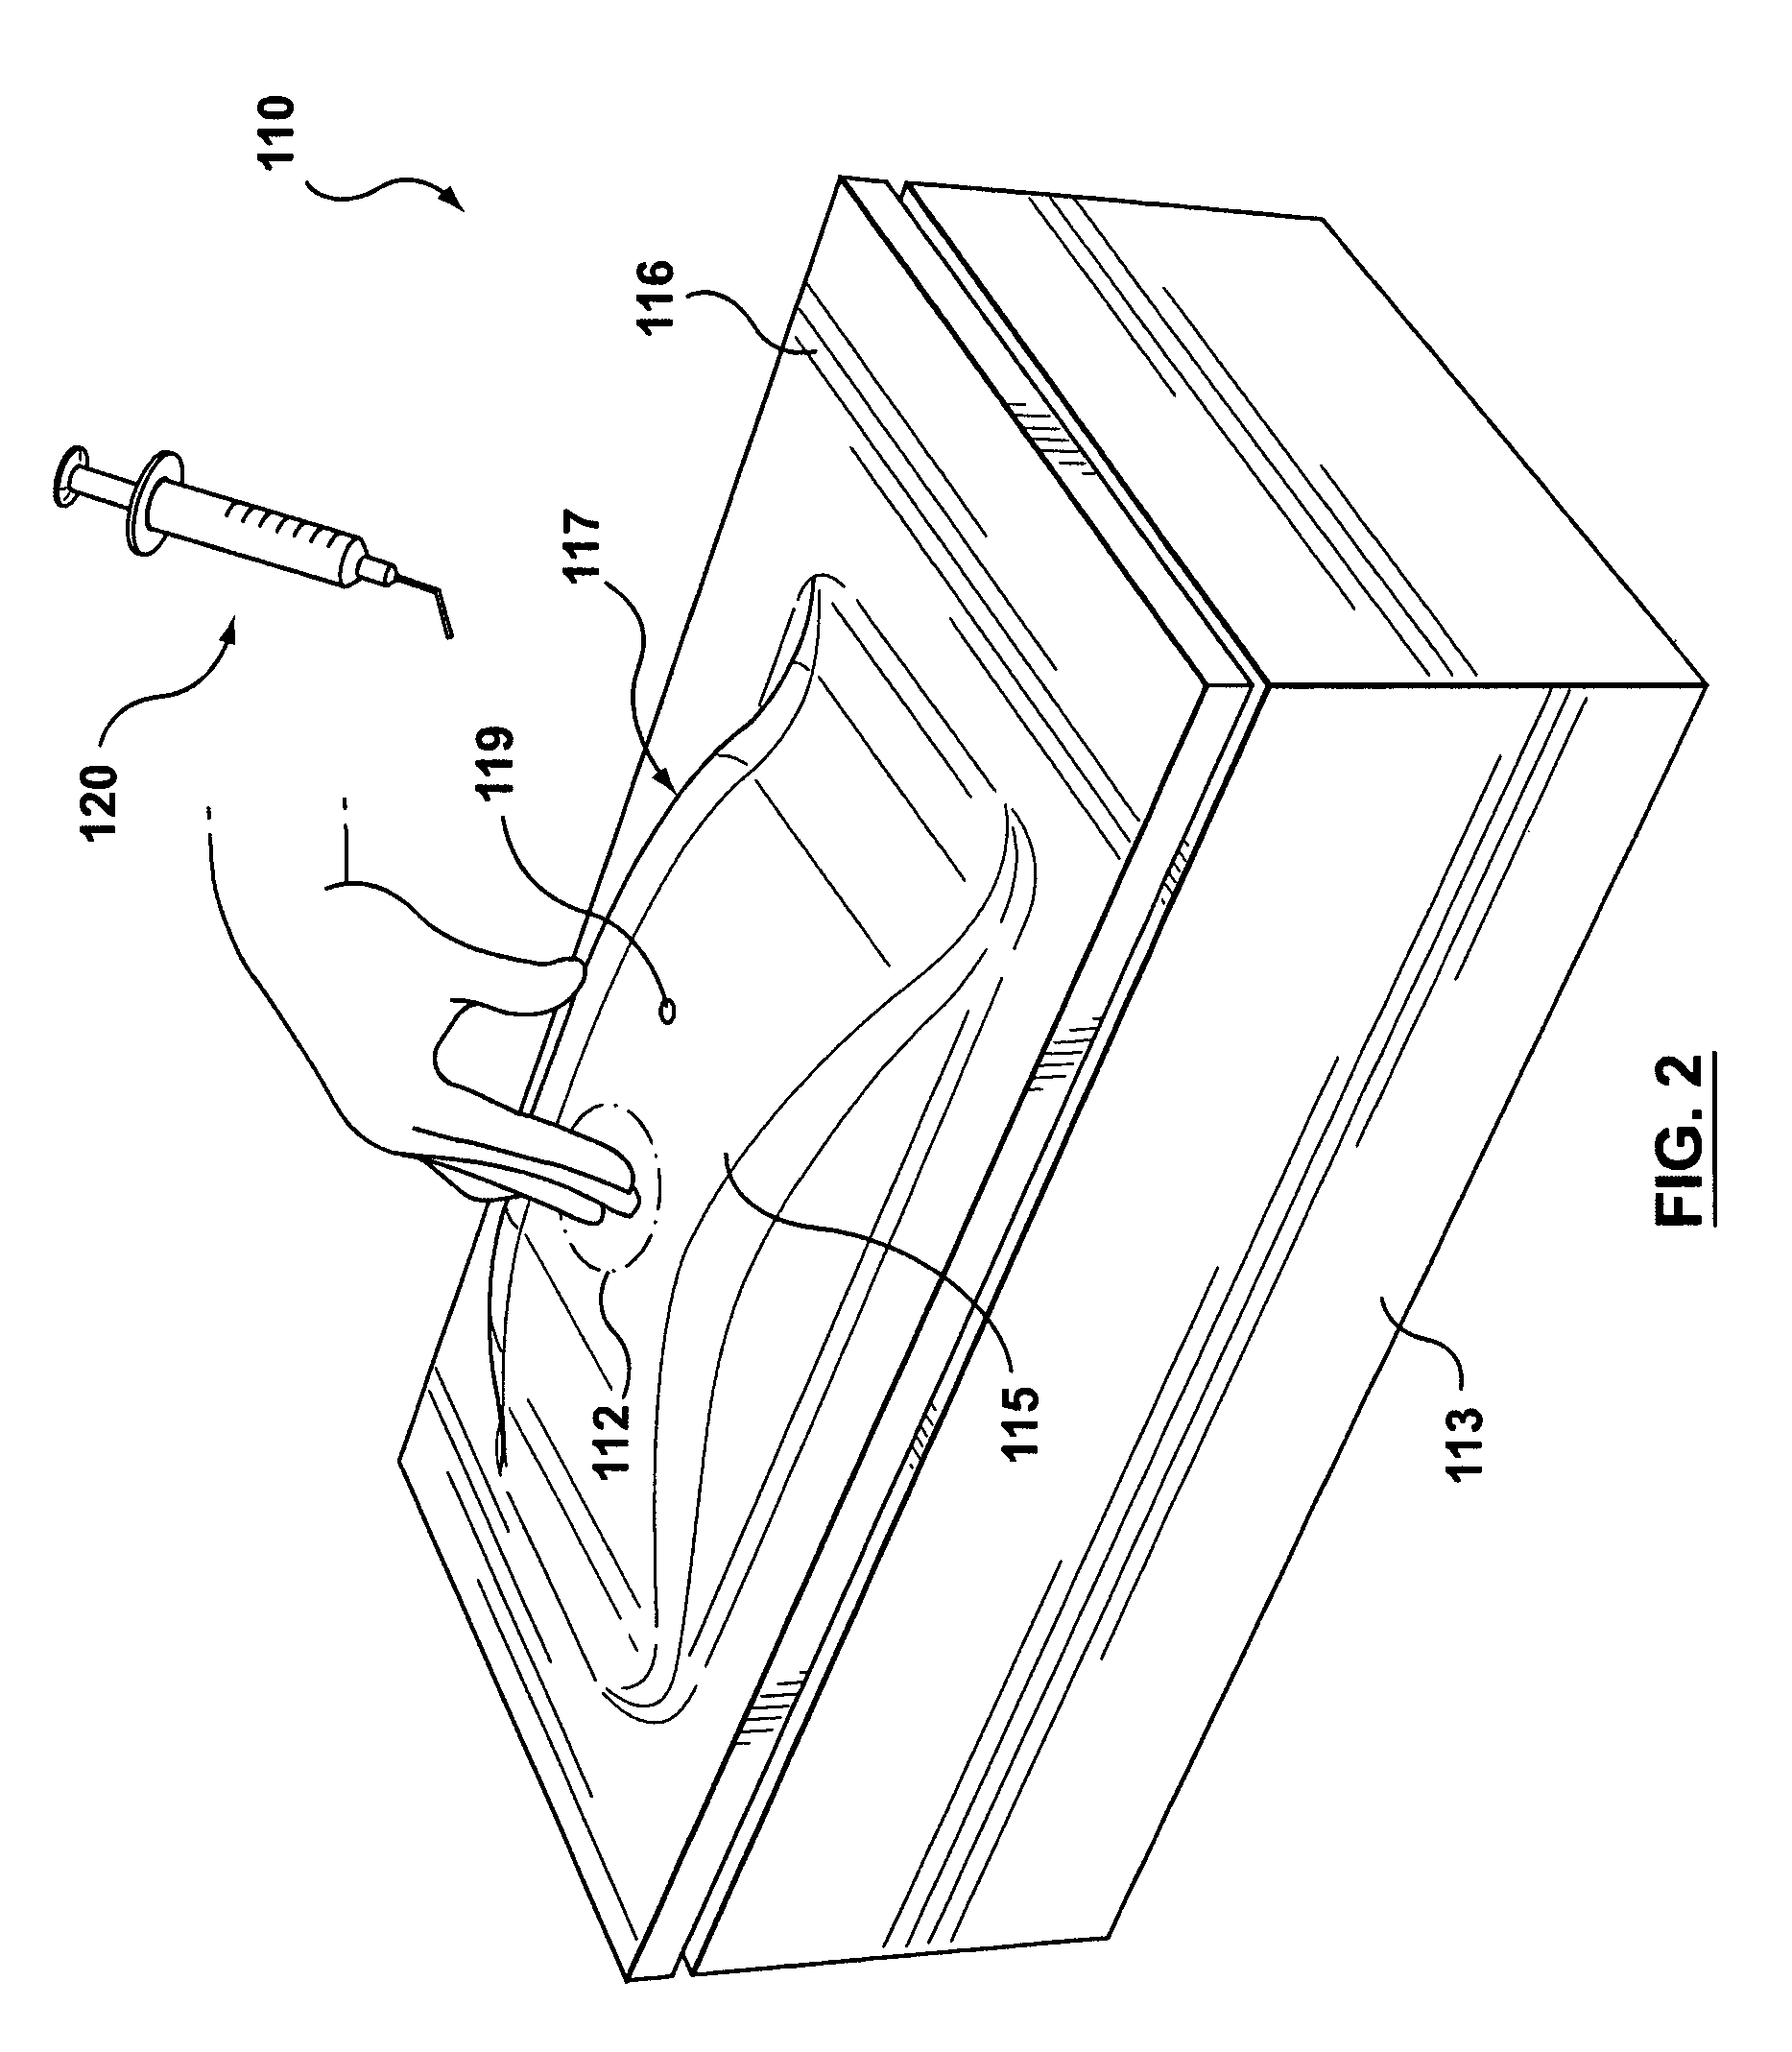 System for displaying and interacting with palpatable feature